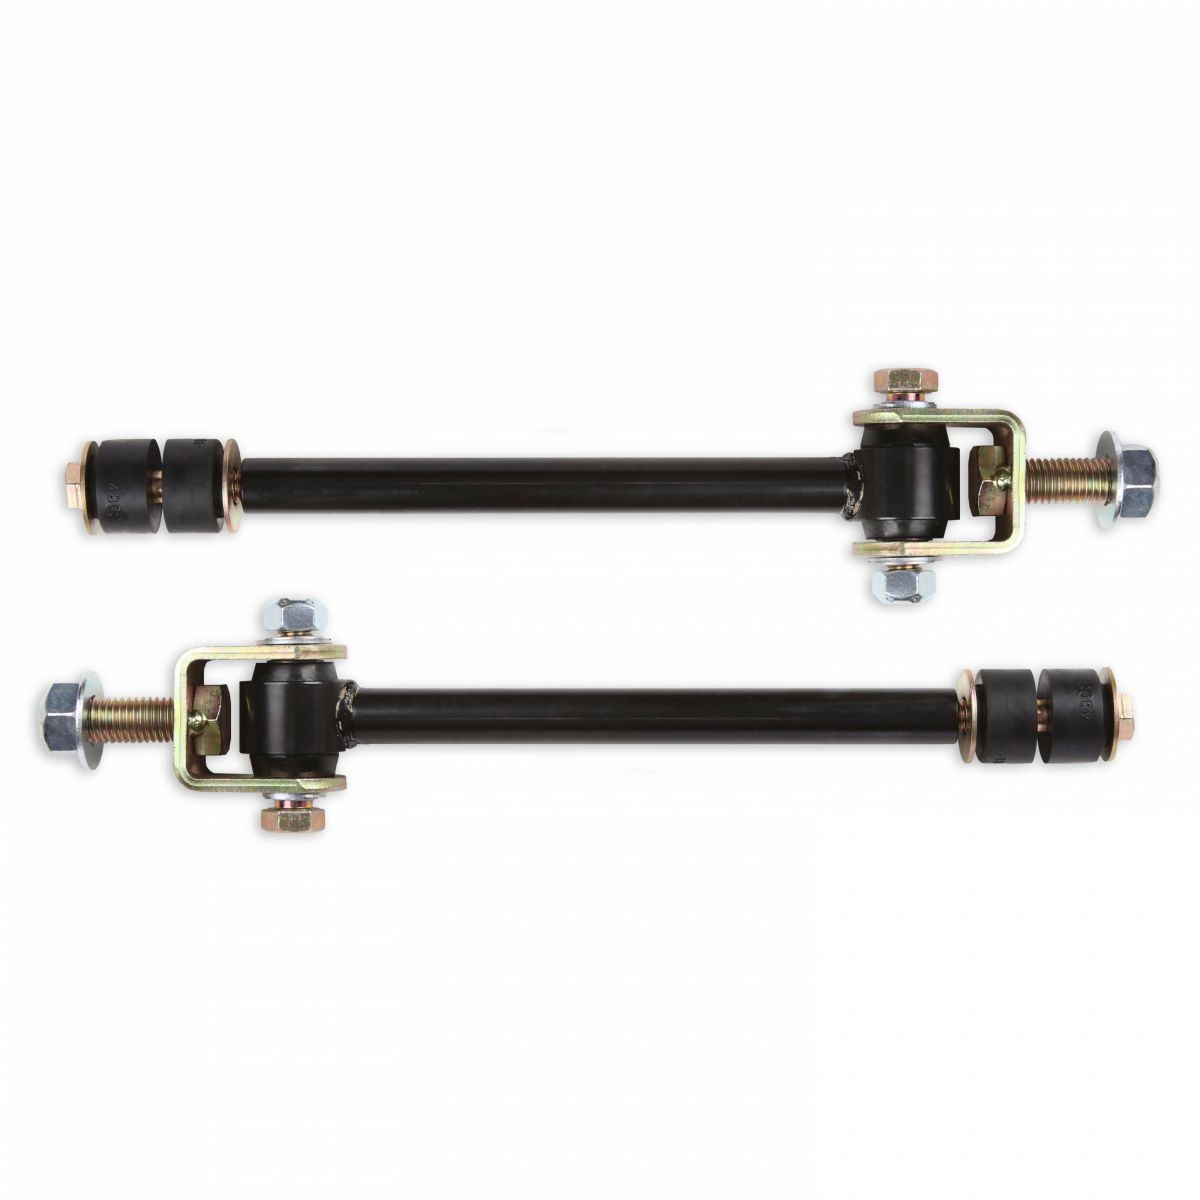 Cognito Motorsports - Cognito Front Sway Bar End Link Kit for 7/9-Inch Lifts on 01-19 Silverado/Sierra